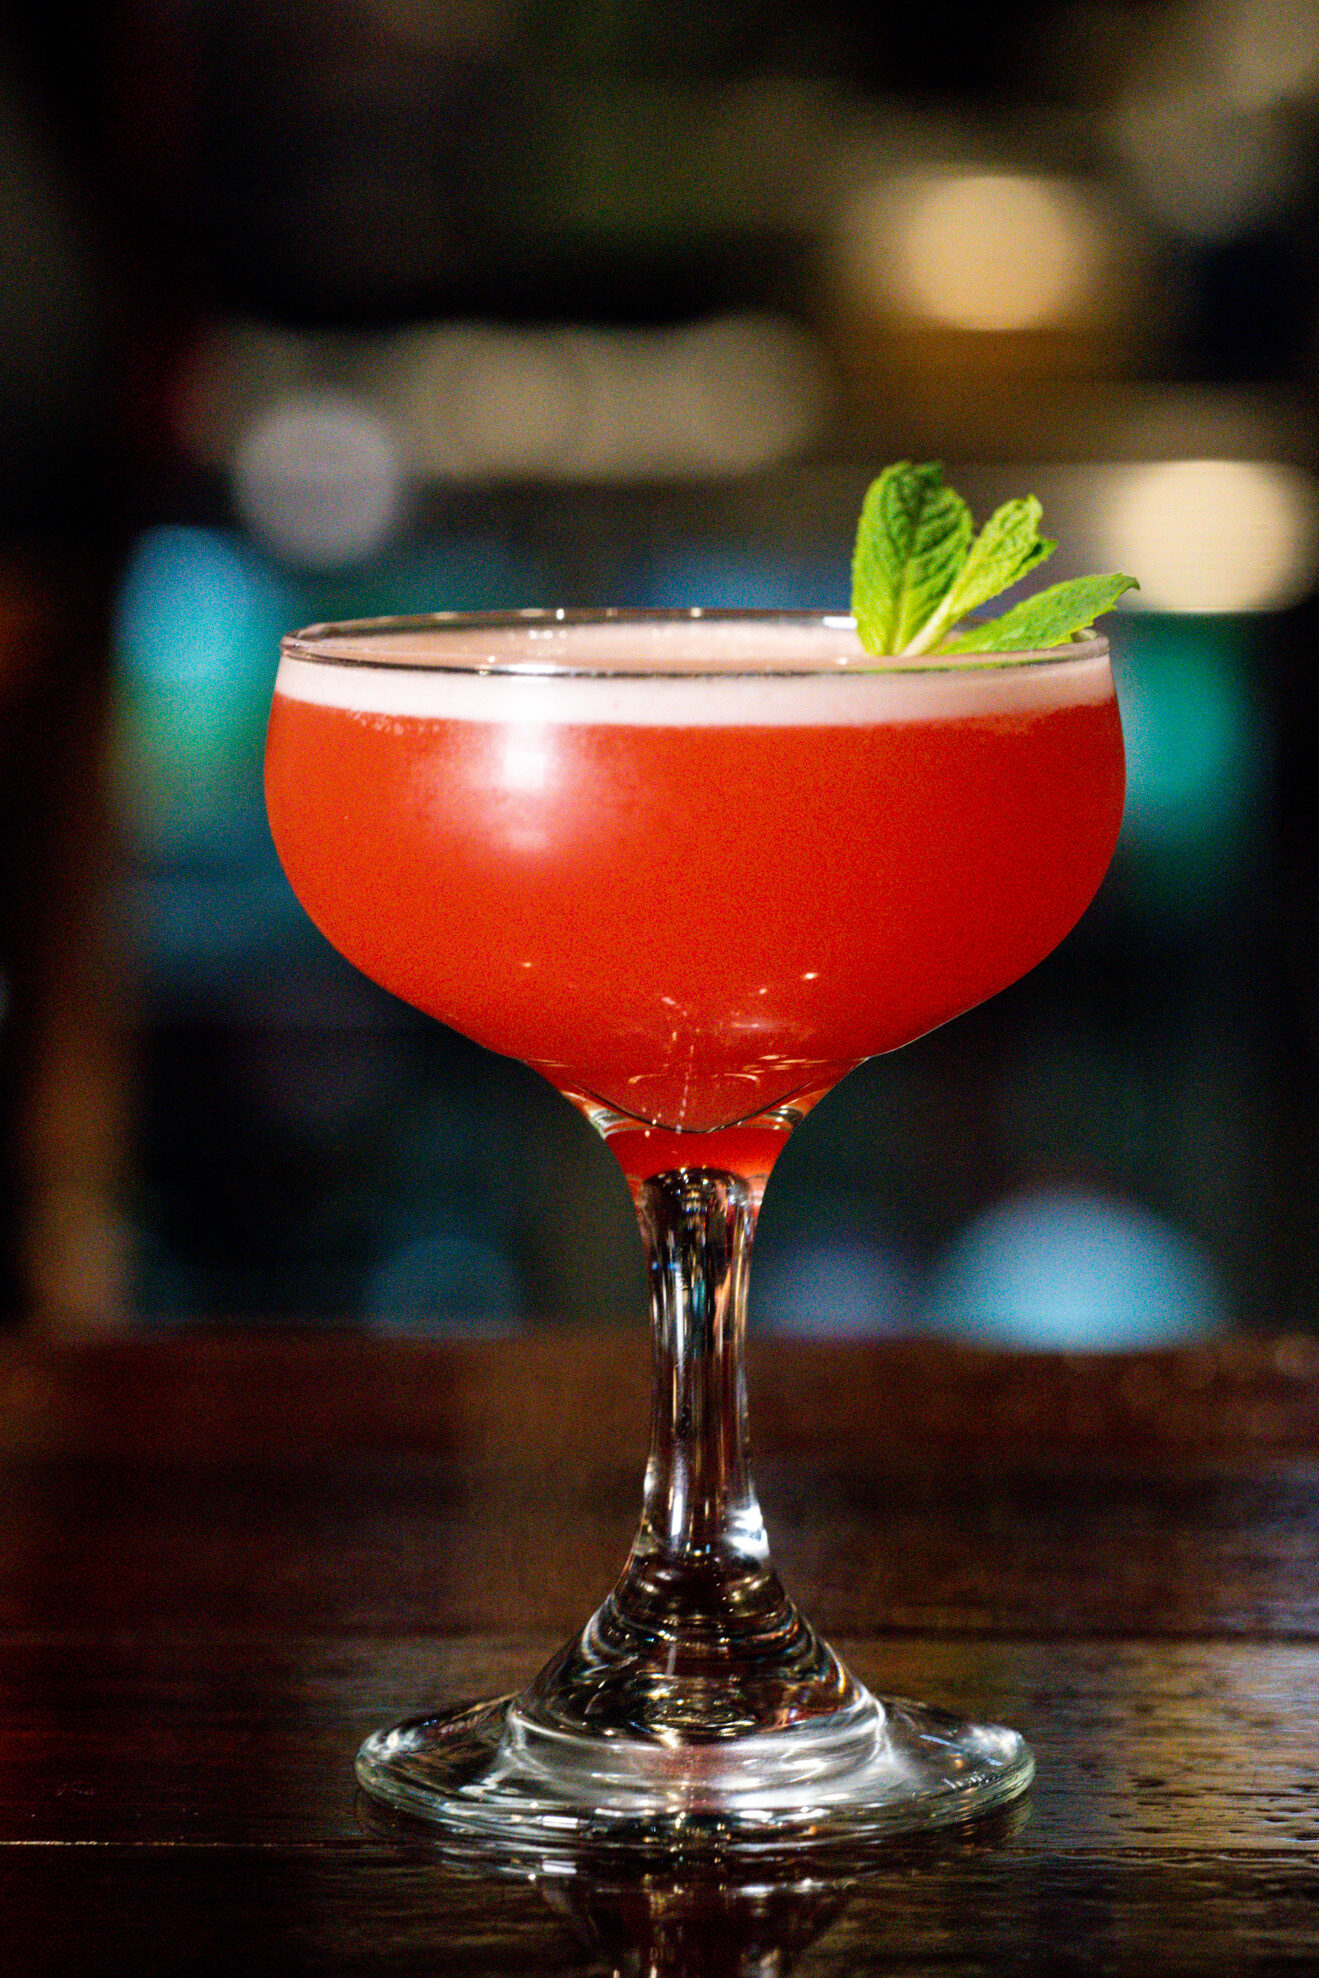 a photo of a Sicilian Punch from Juniper. A red mocktail in a coupe glass on a table garnished with mint leaves